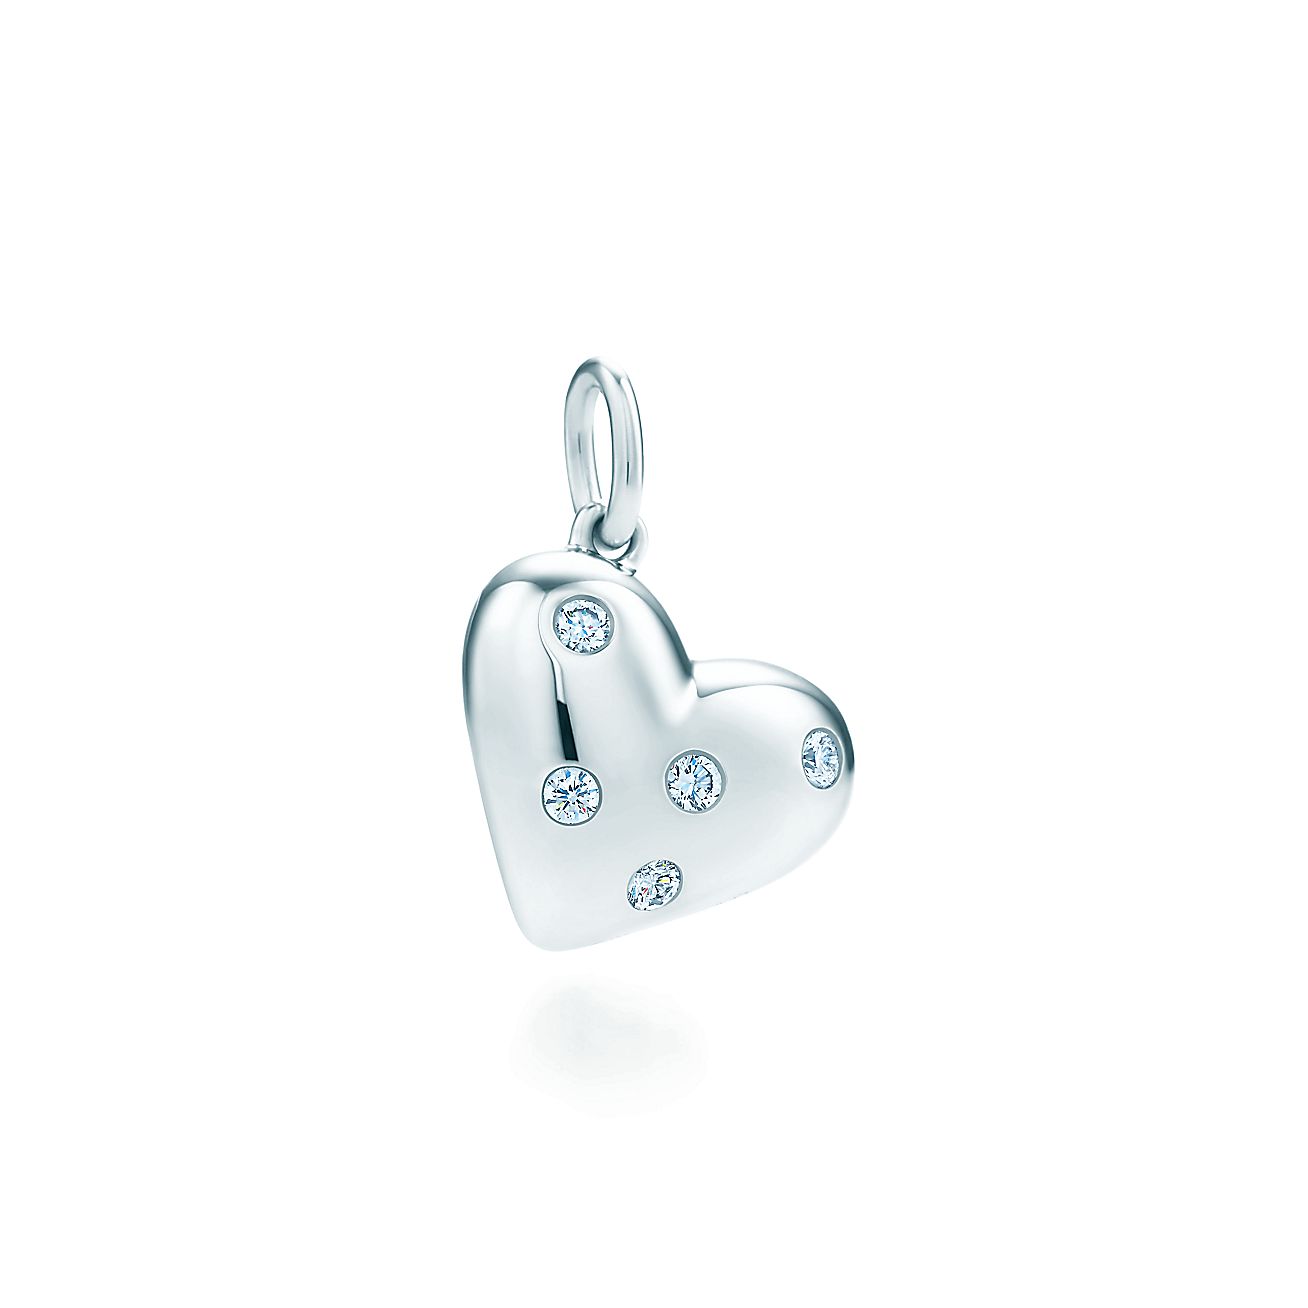 Etoile heart charm in 18k white gold with diamonds. | Tiffany & Co.